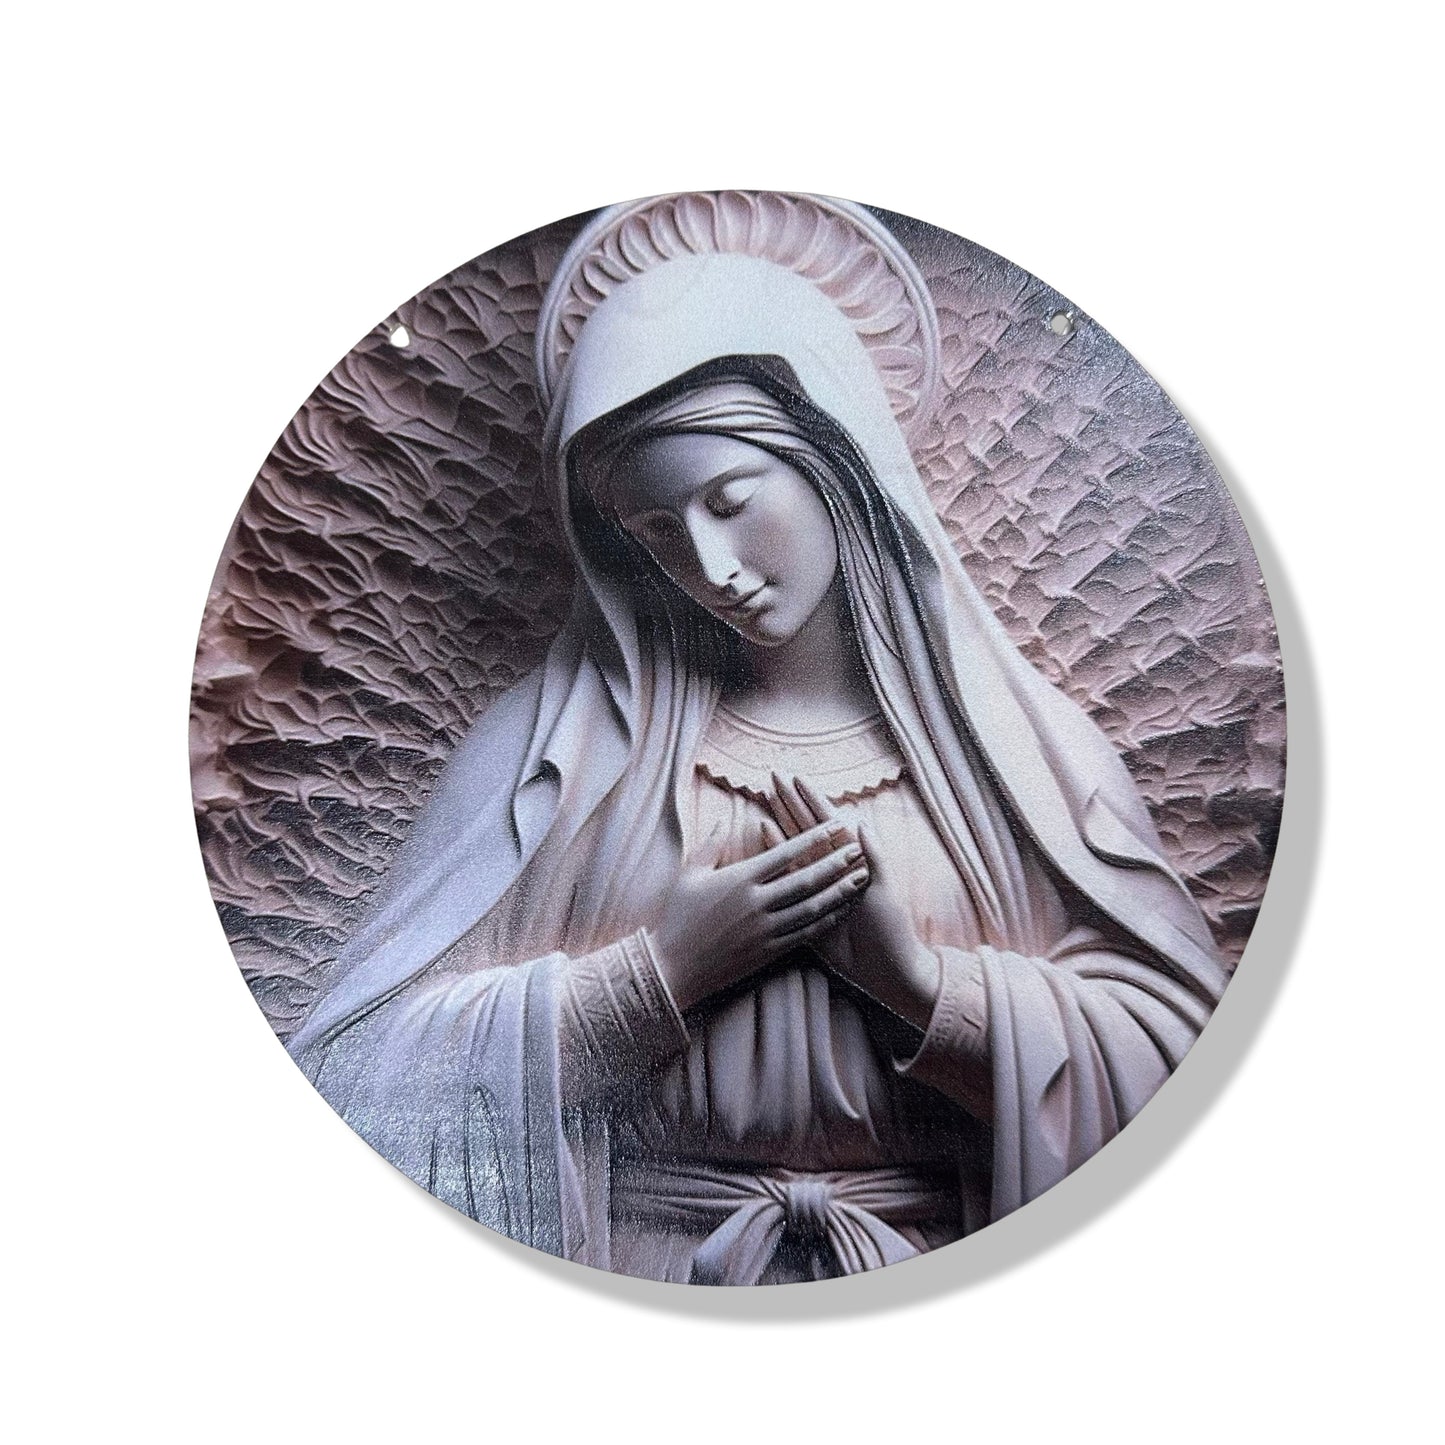 Assorted Round Images of Our Lady